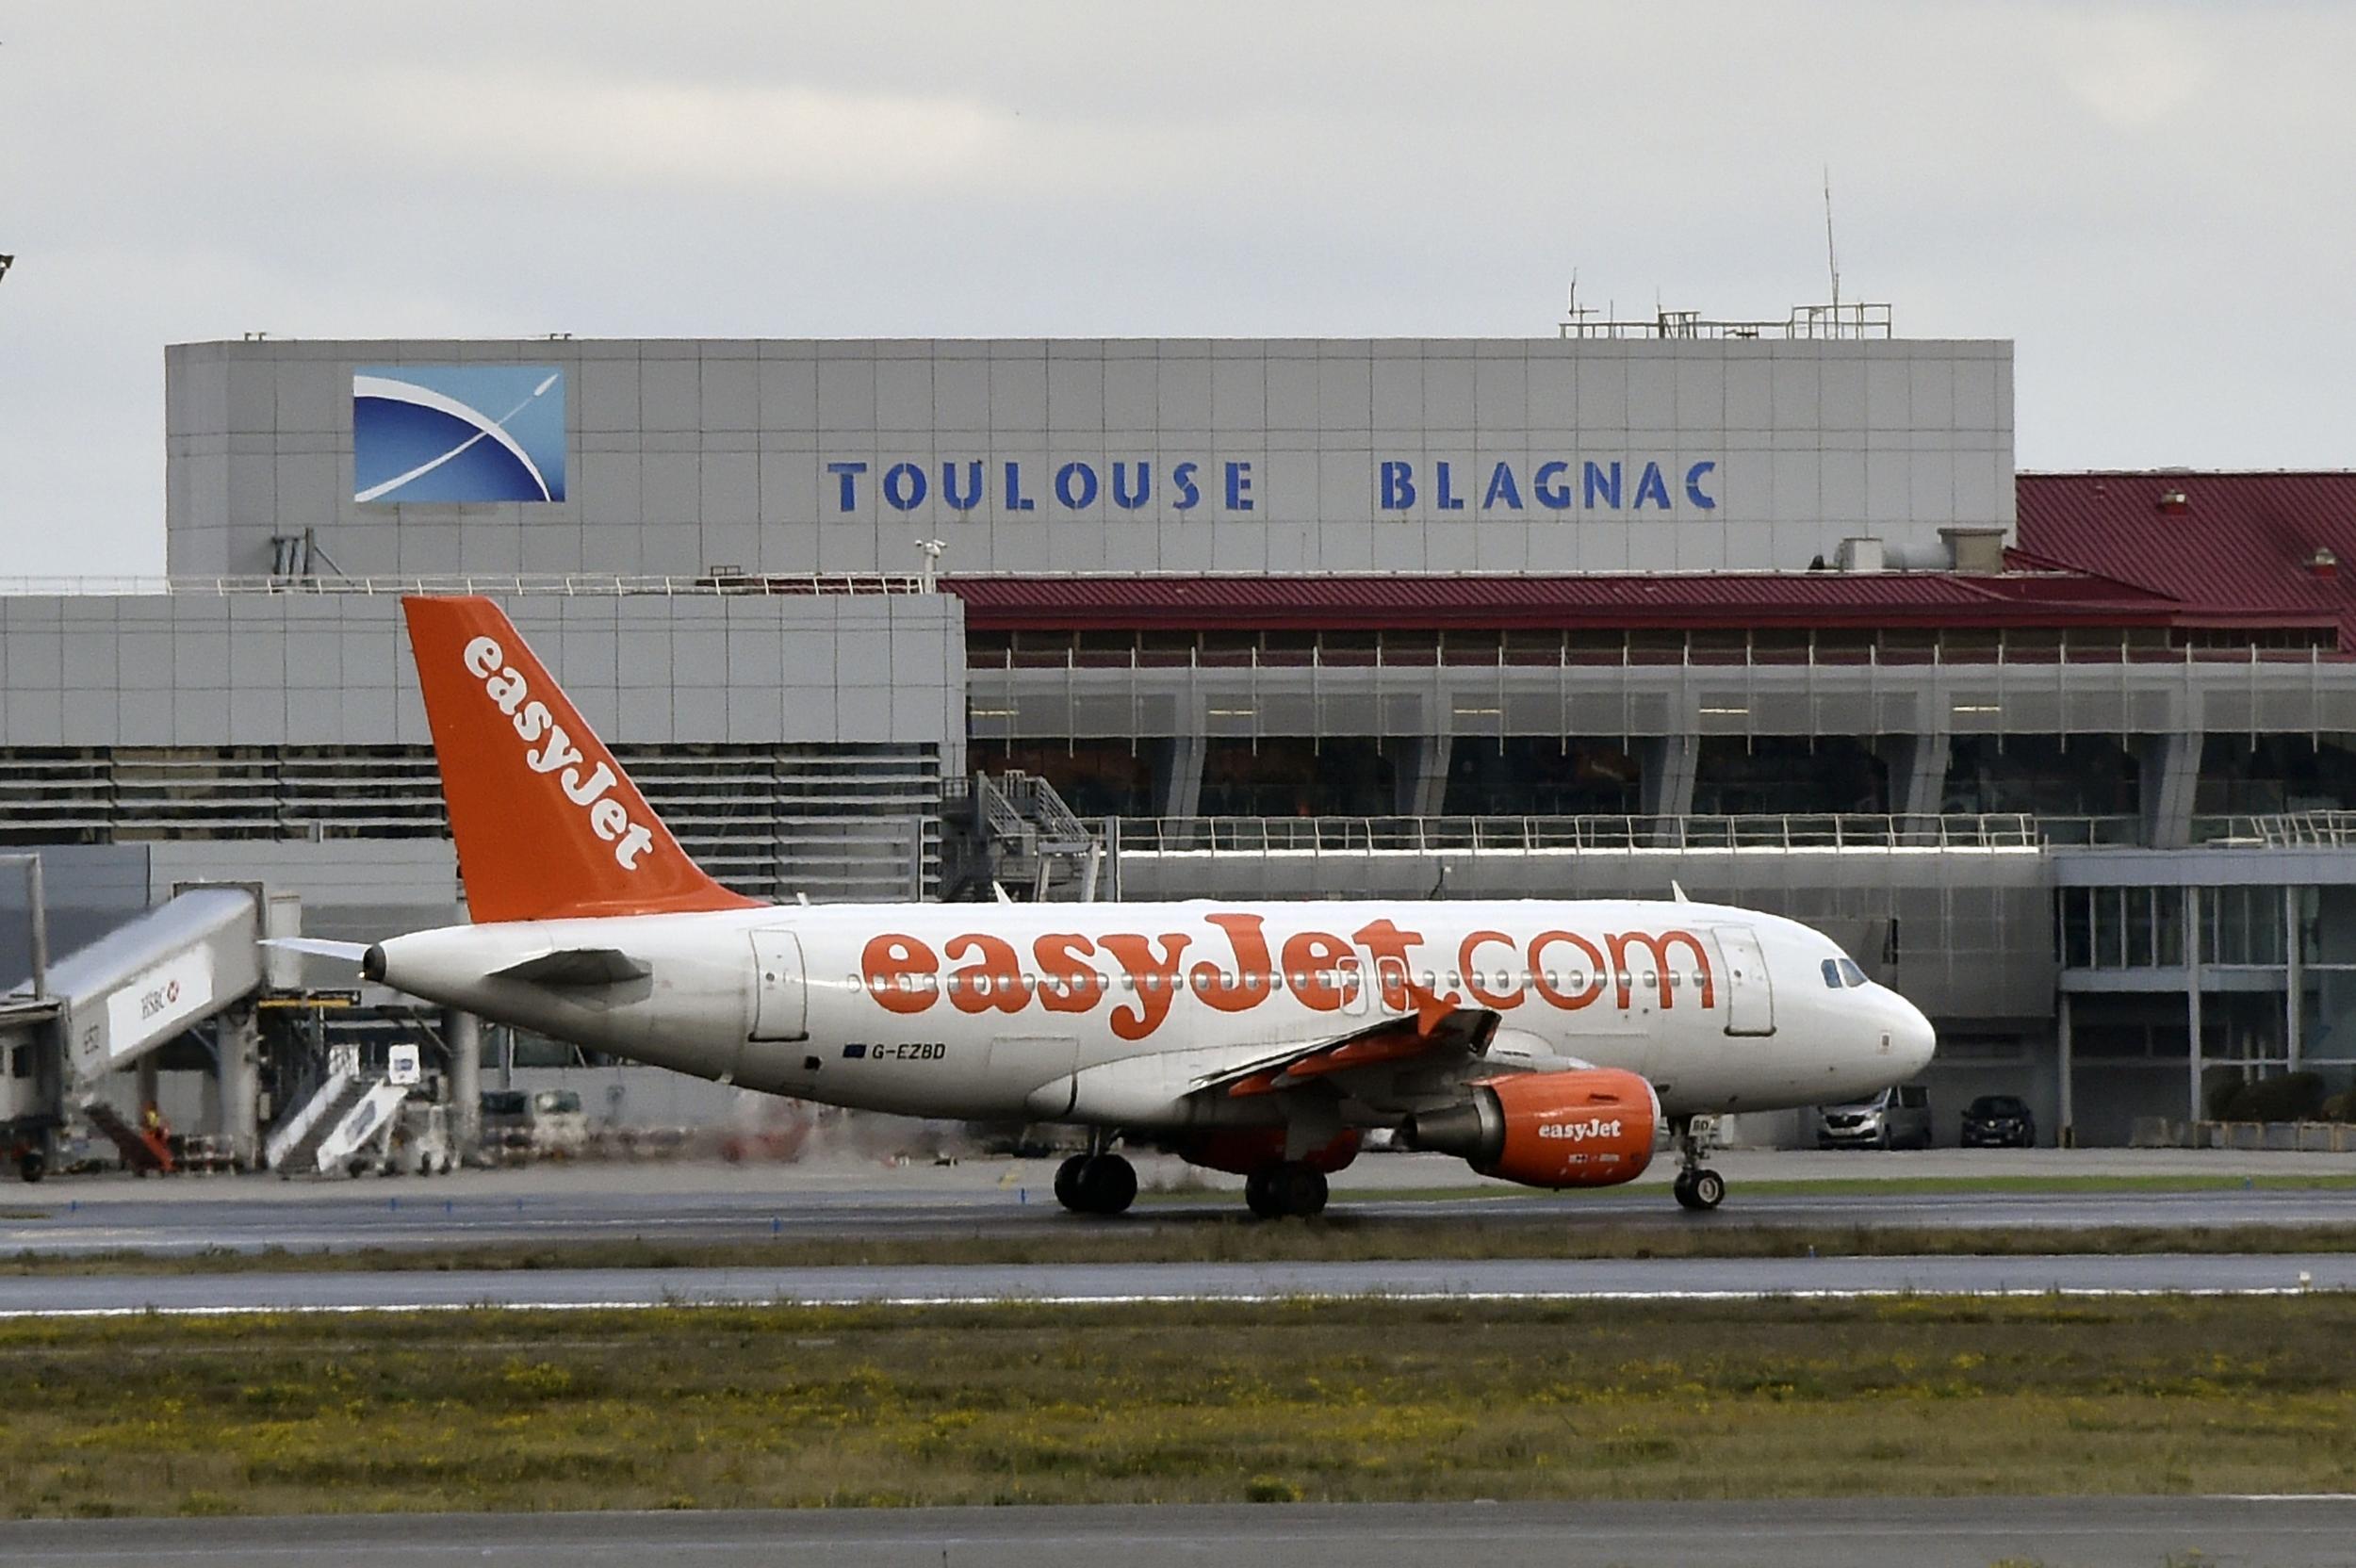 Sixty per cent of easyJet flights normally touch on French airspace